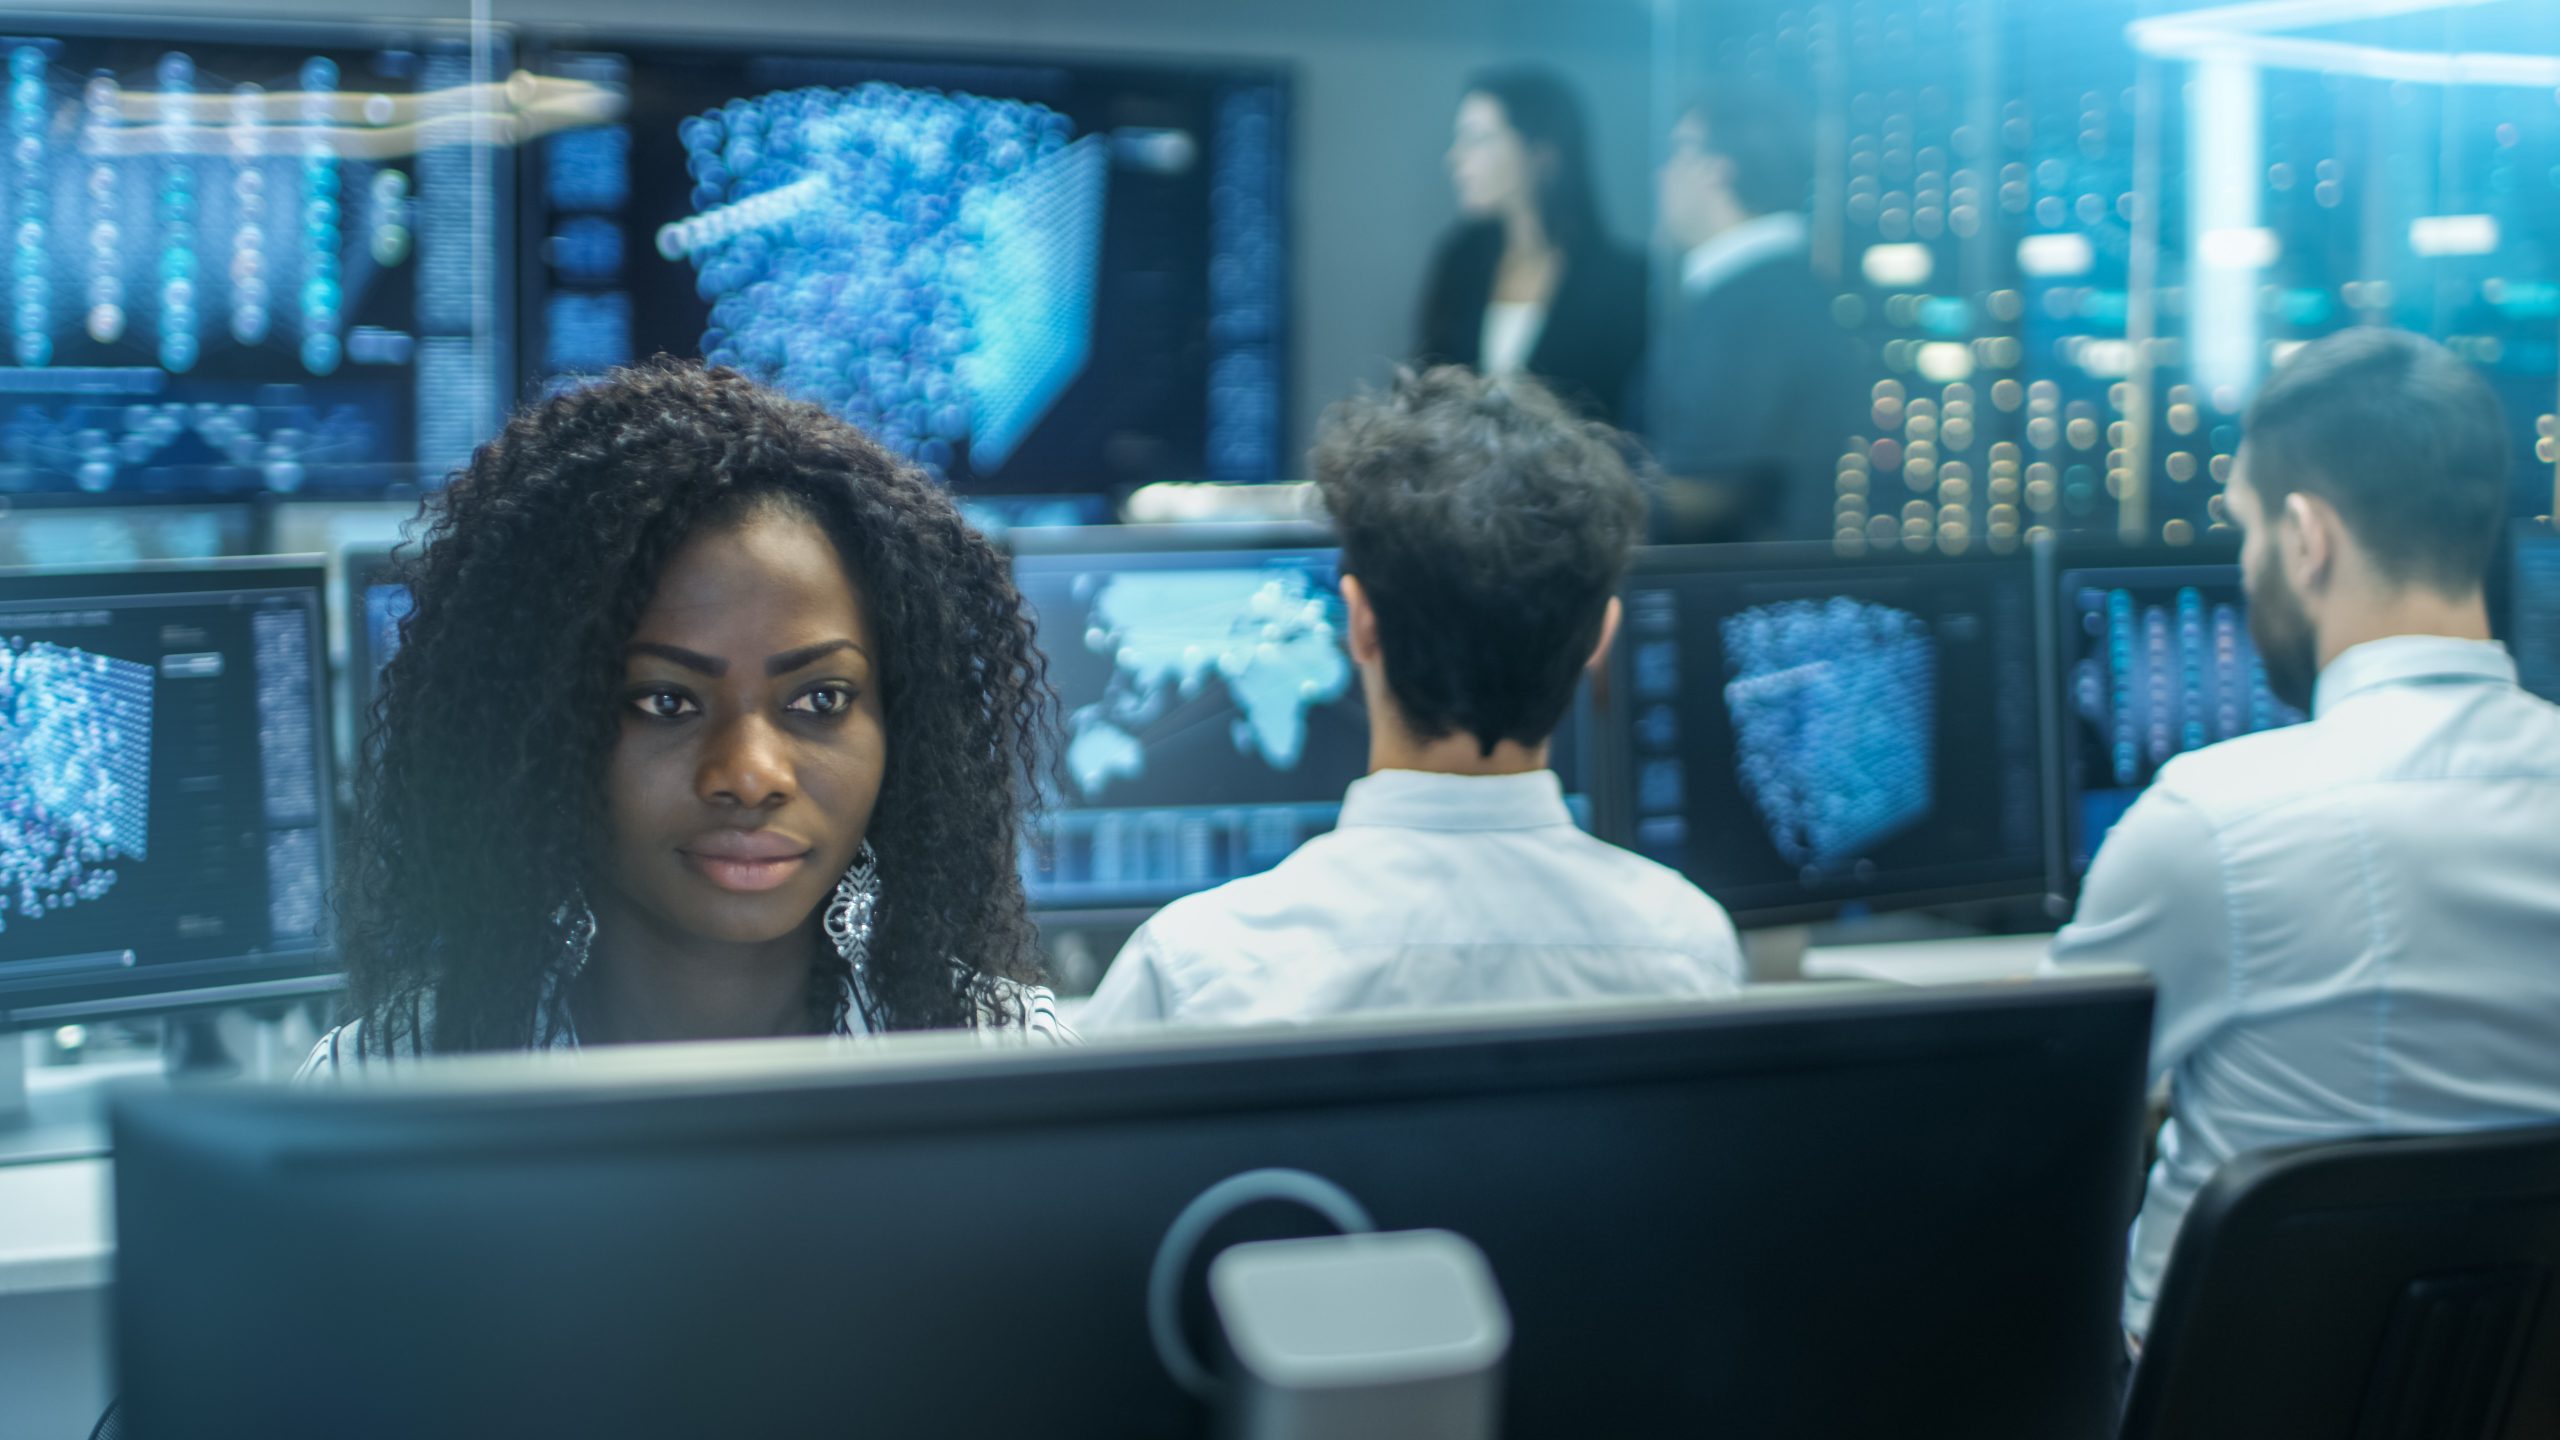 Female Computer Engineer Works on a Neural Network/ Artificial Intelligence Project with Her Multi-Ethnic Team of Specialist. Office Has Multiple Screens Showing 3D Visualization.